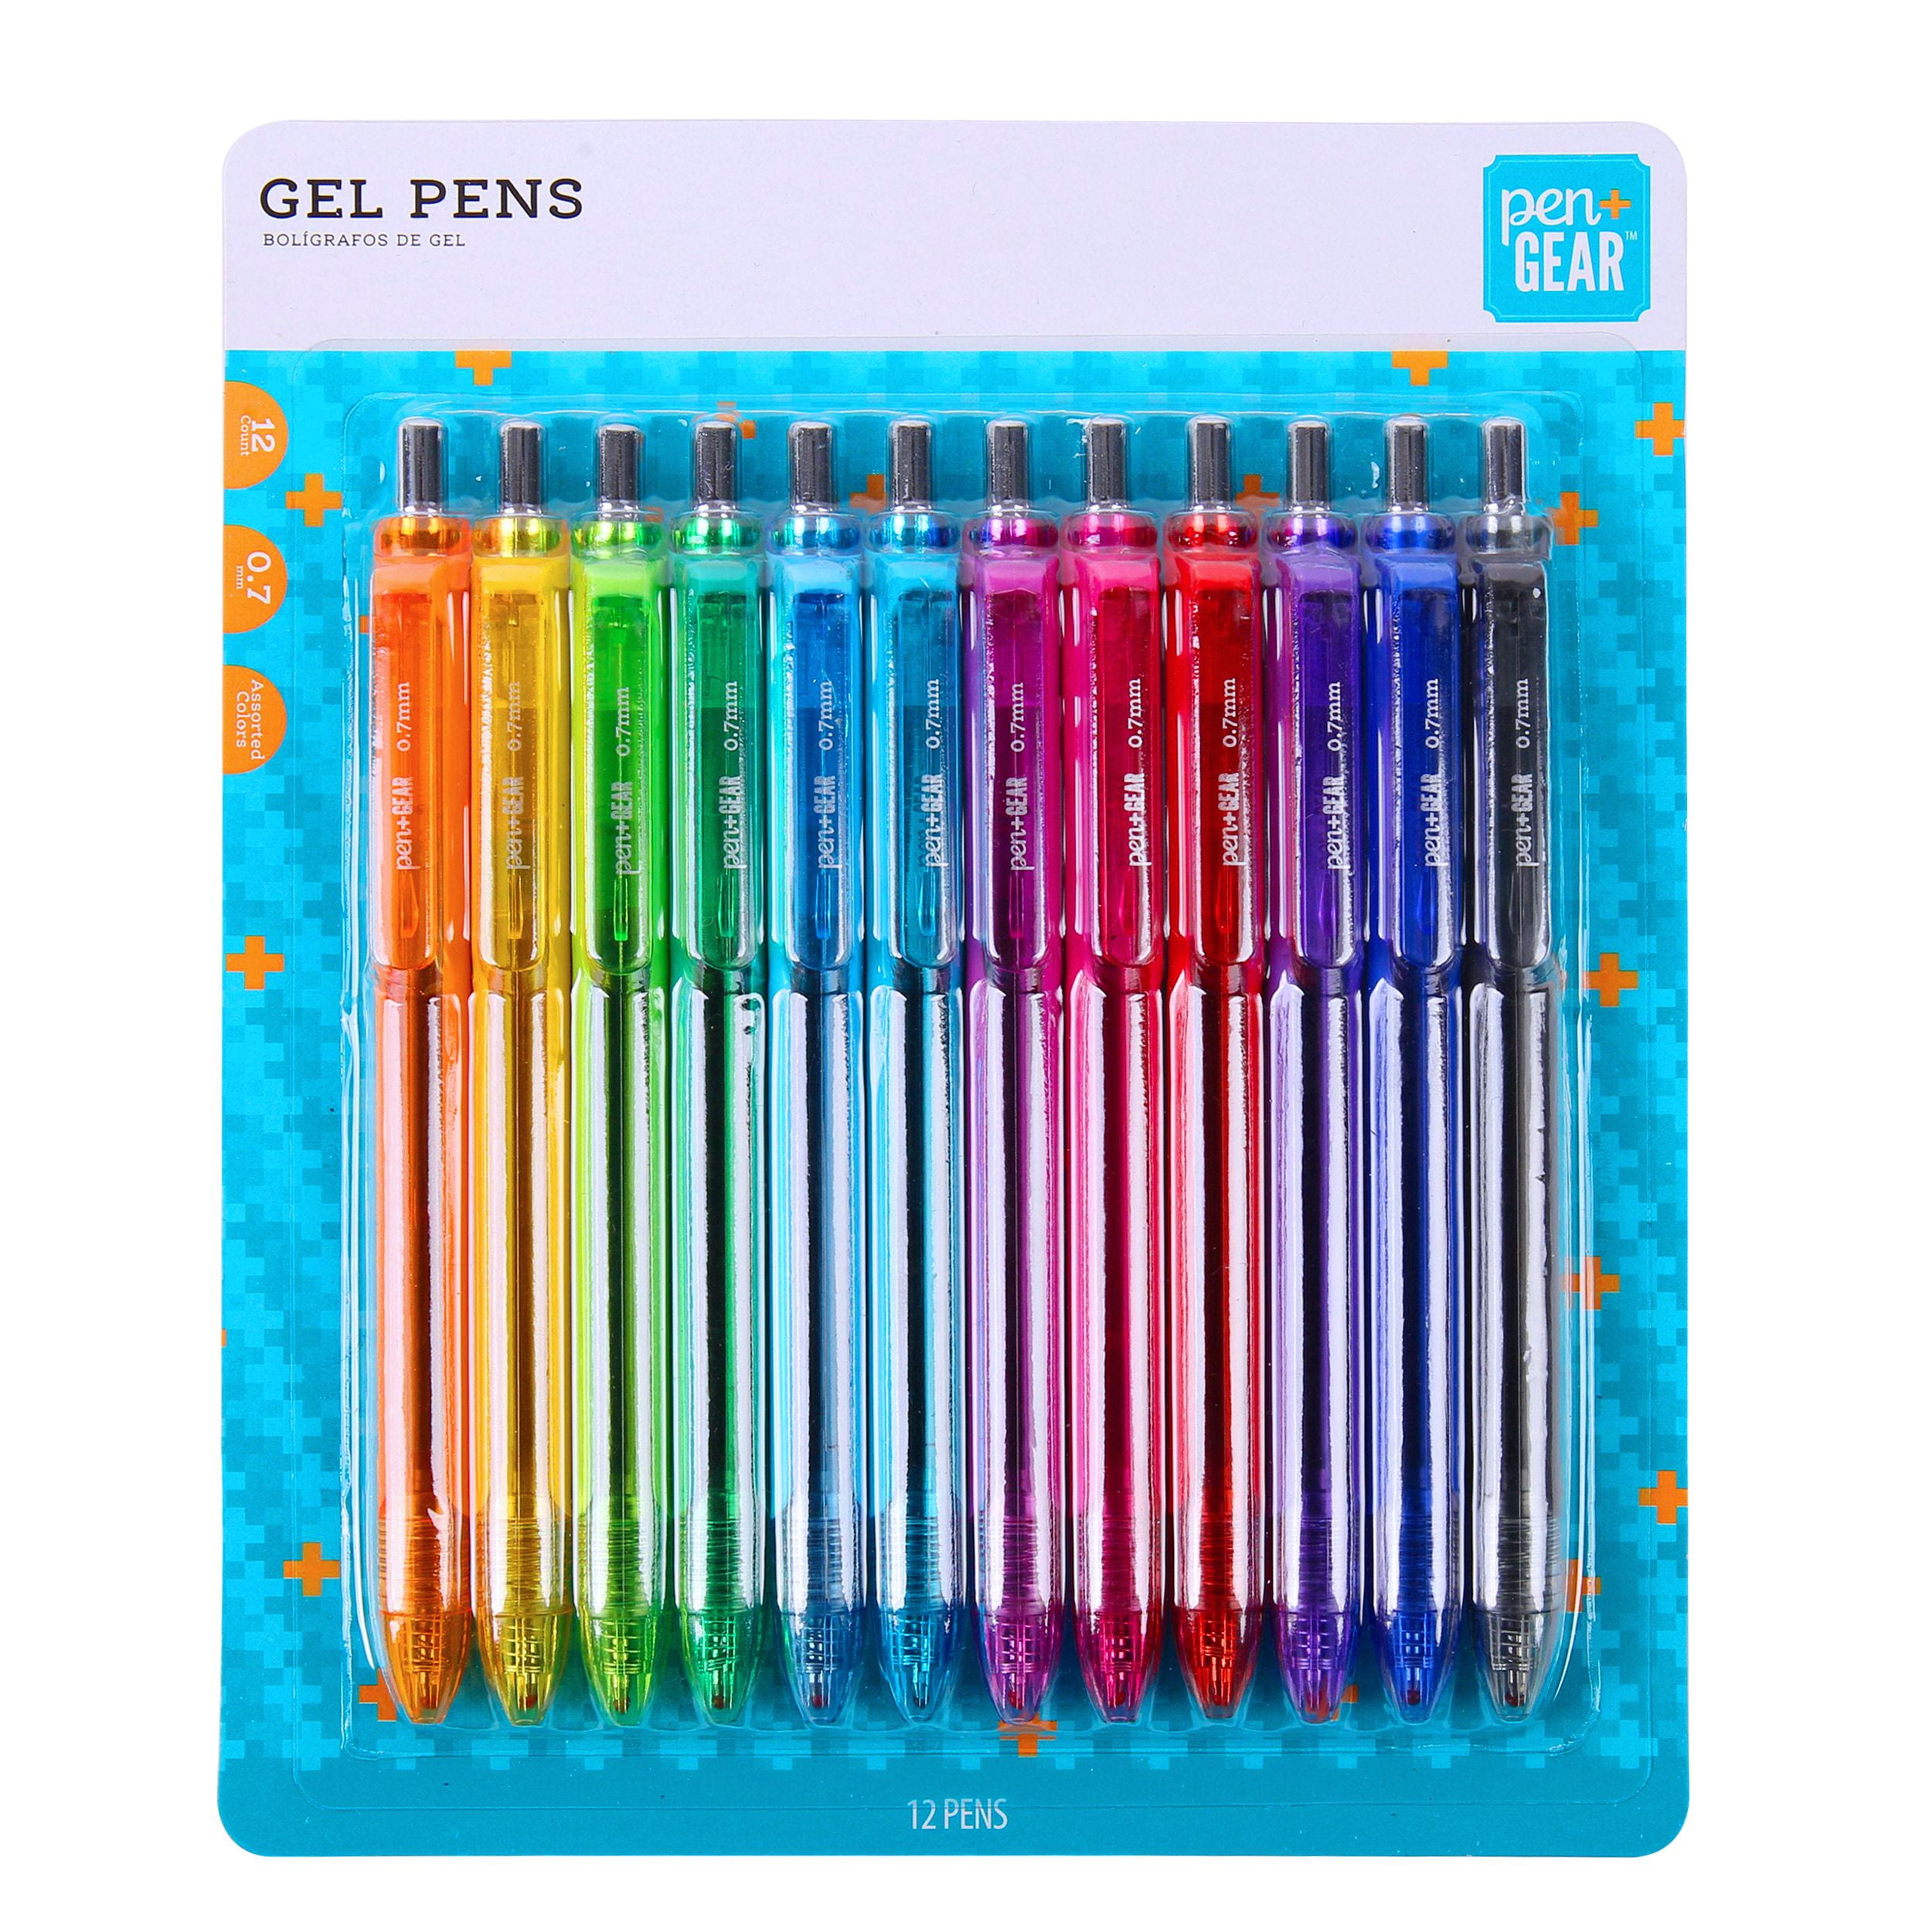 Pen+Gear Dual End Markers, Assorted Colors, 24 Count - Testbankship